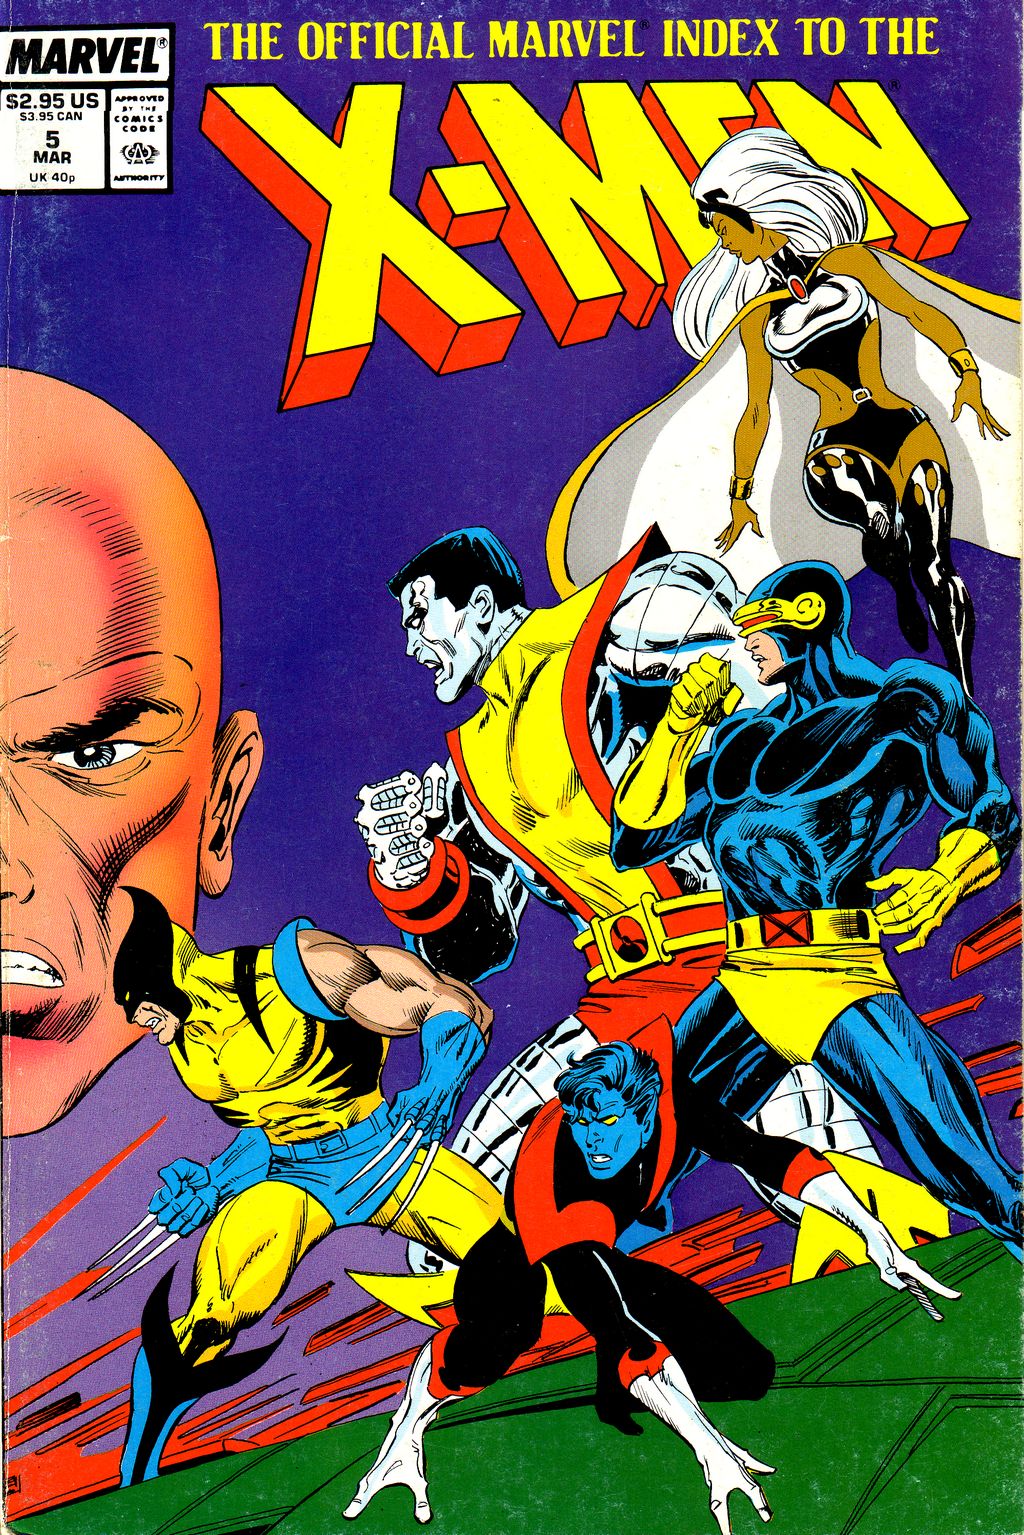 The Official Marvel Index To The X-Men (1987) issue 5 - Page 1